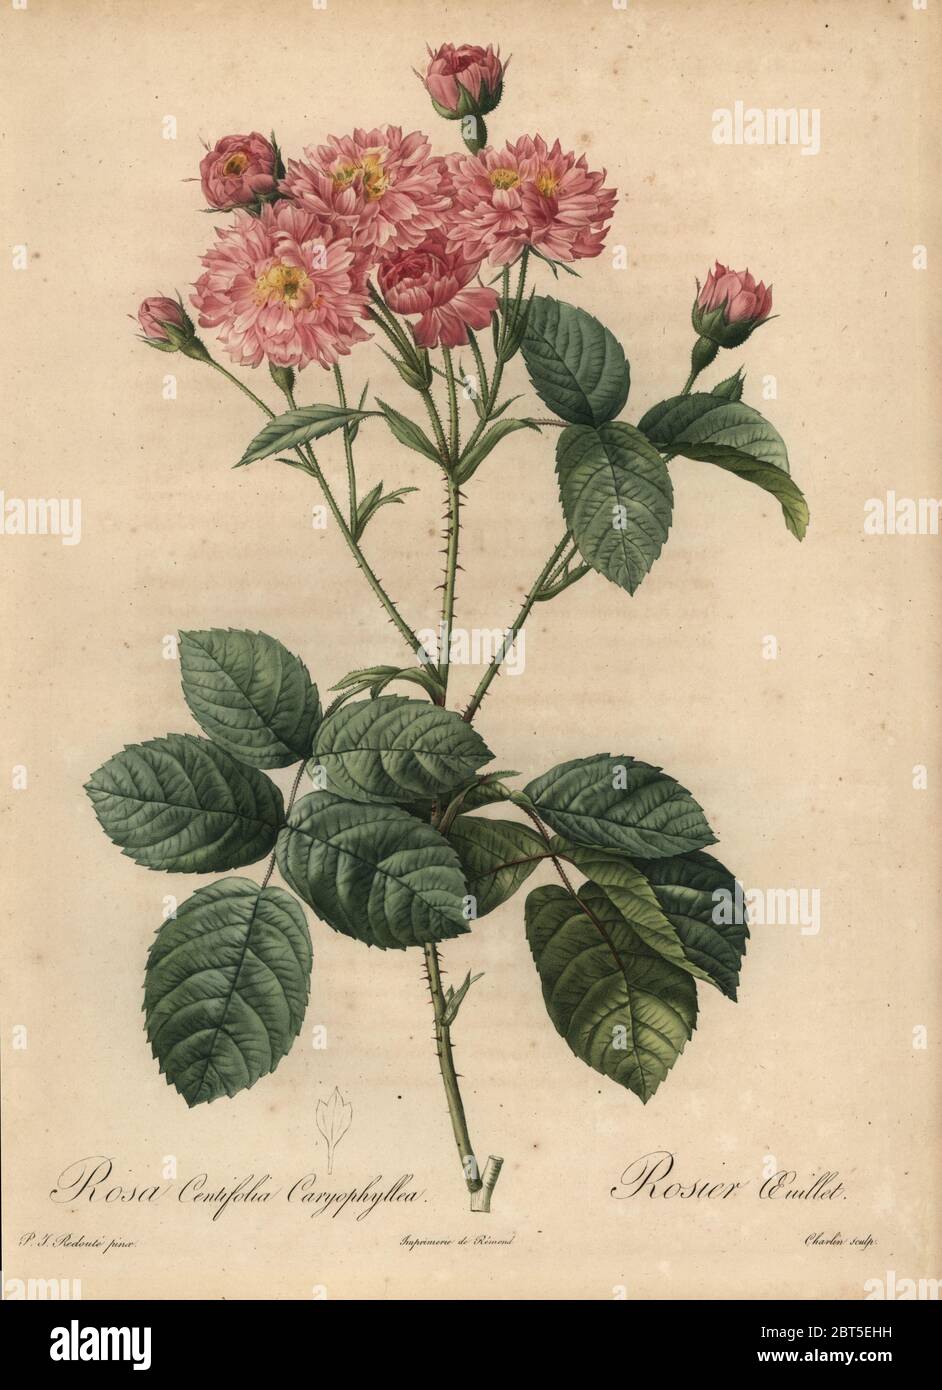 Pink carnation-petal cabbage rose, Rosa centifolia caryophyllea, Rosier oeuillet. Stipple copperplate engraving by Jean Louis Auguste Charlin handcoloured a la poupee after a botanical illustration by Pierre-Joseph Redoute from the first folio edition of Les Roses, Firmin Didot, Paris, 1817. Stock Photo